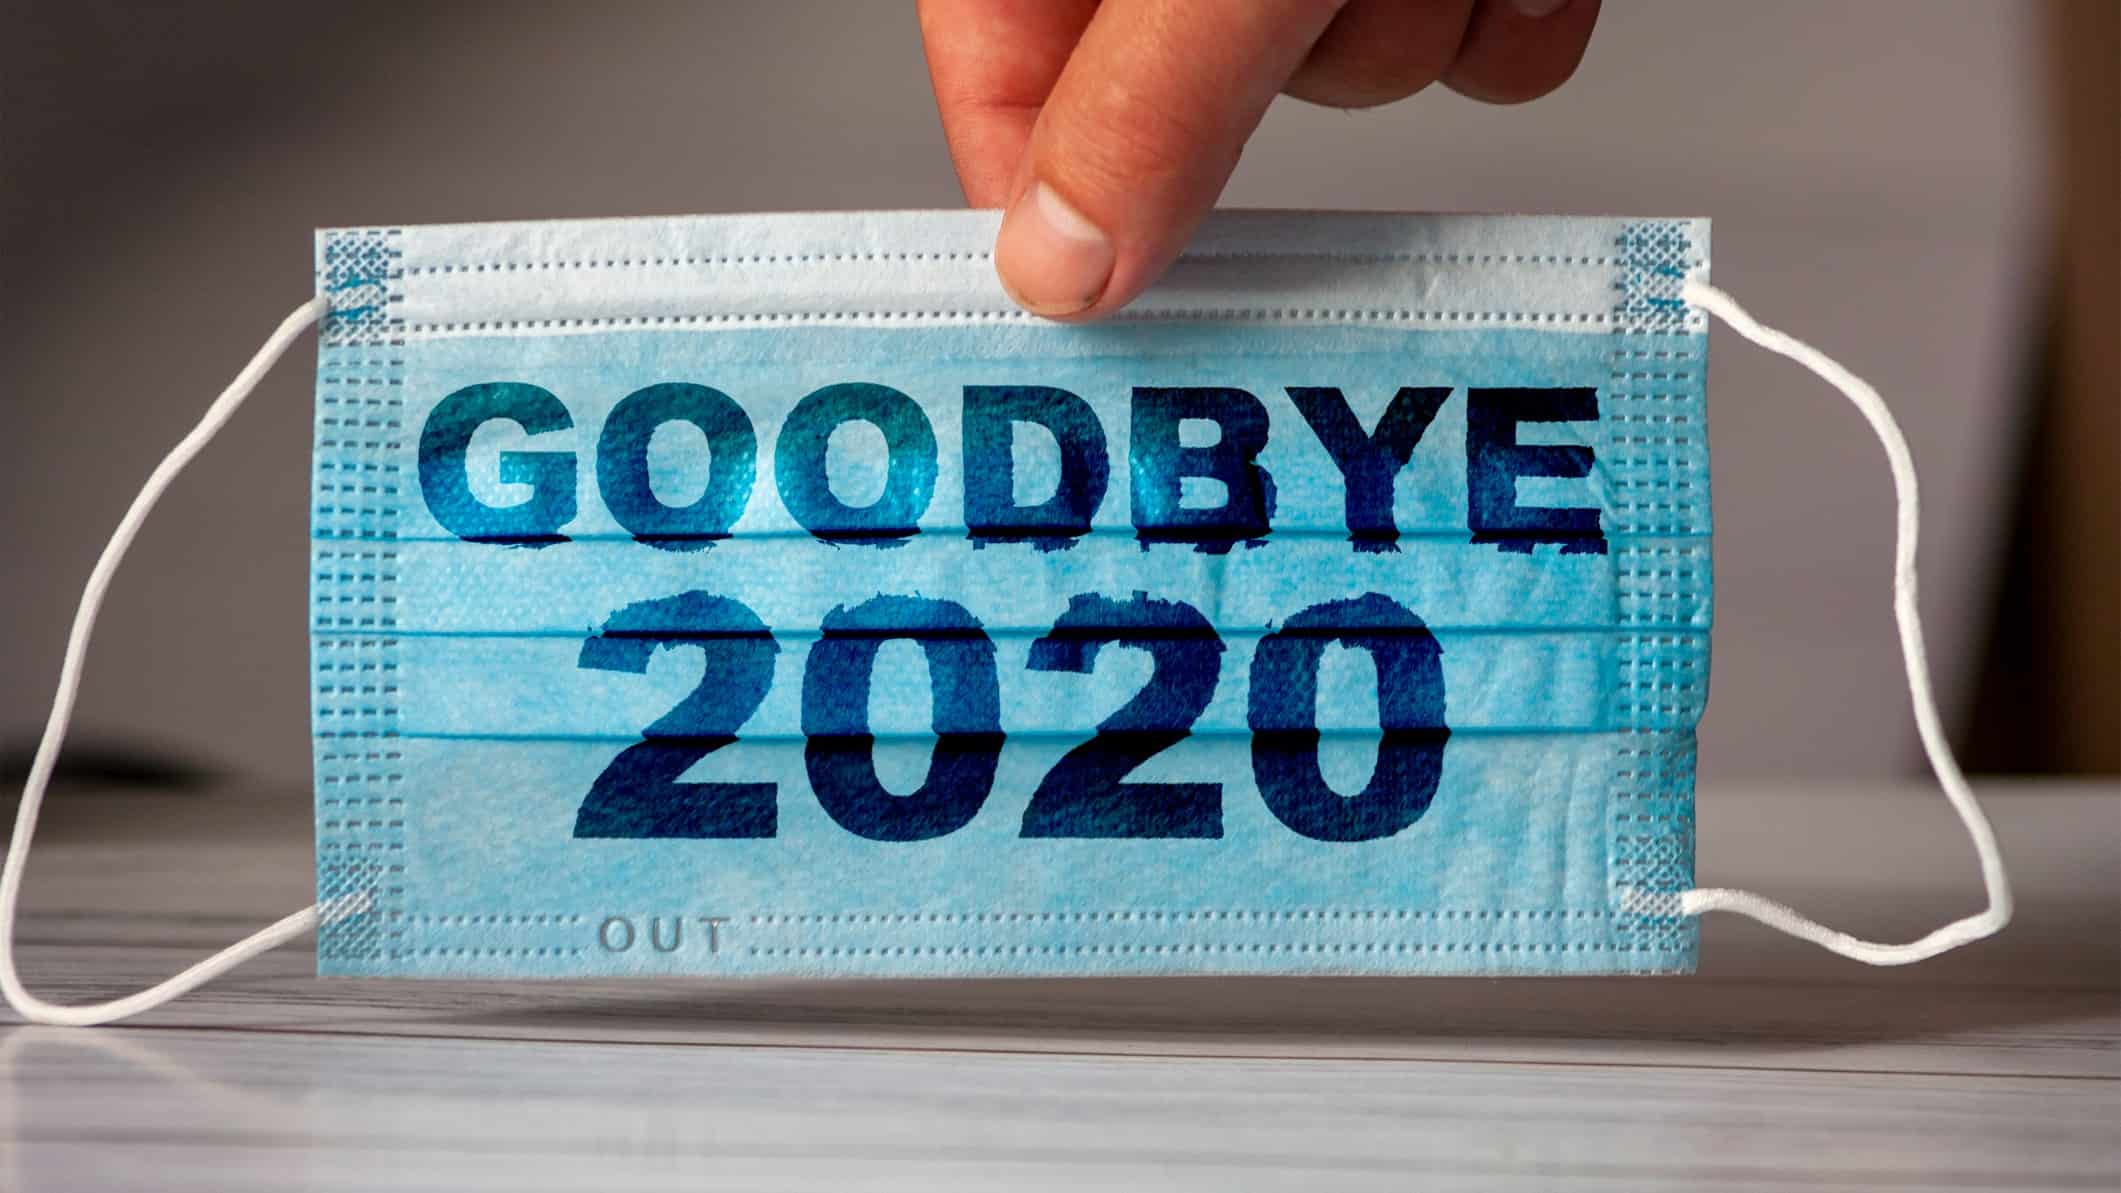 Blue face mask with 'Goodbye 2020' written on it